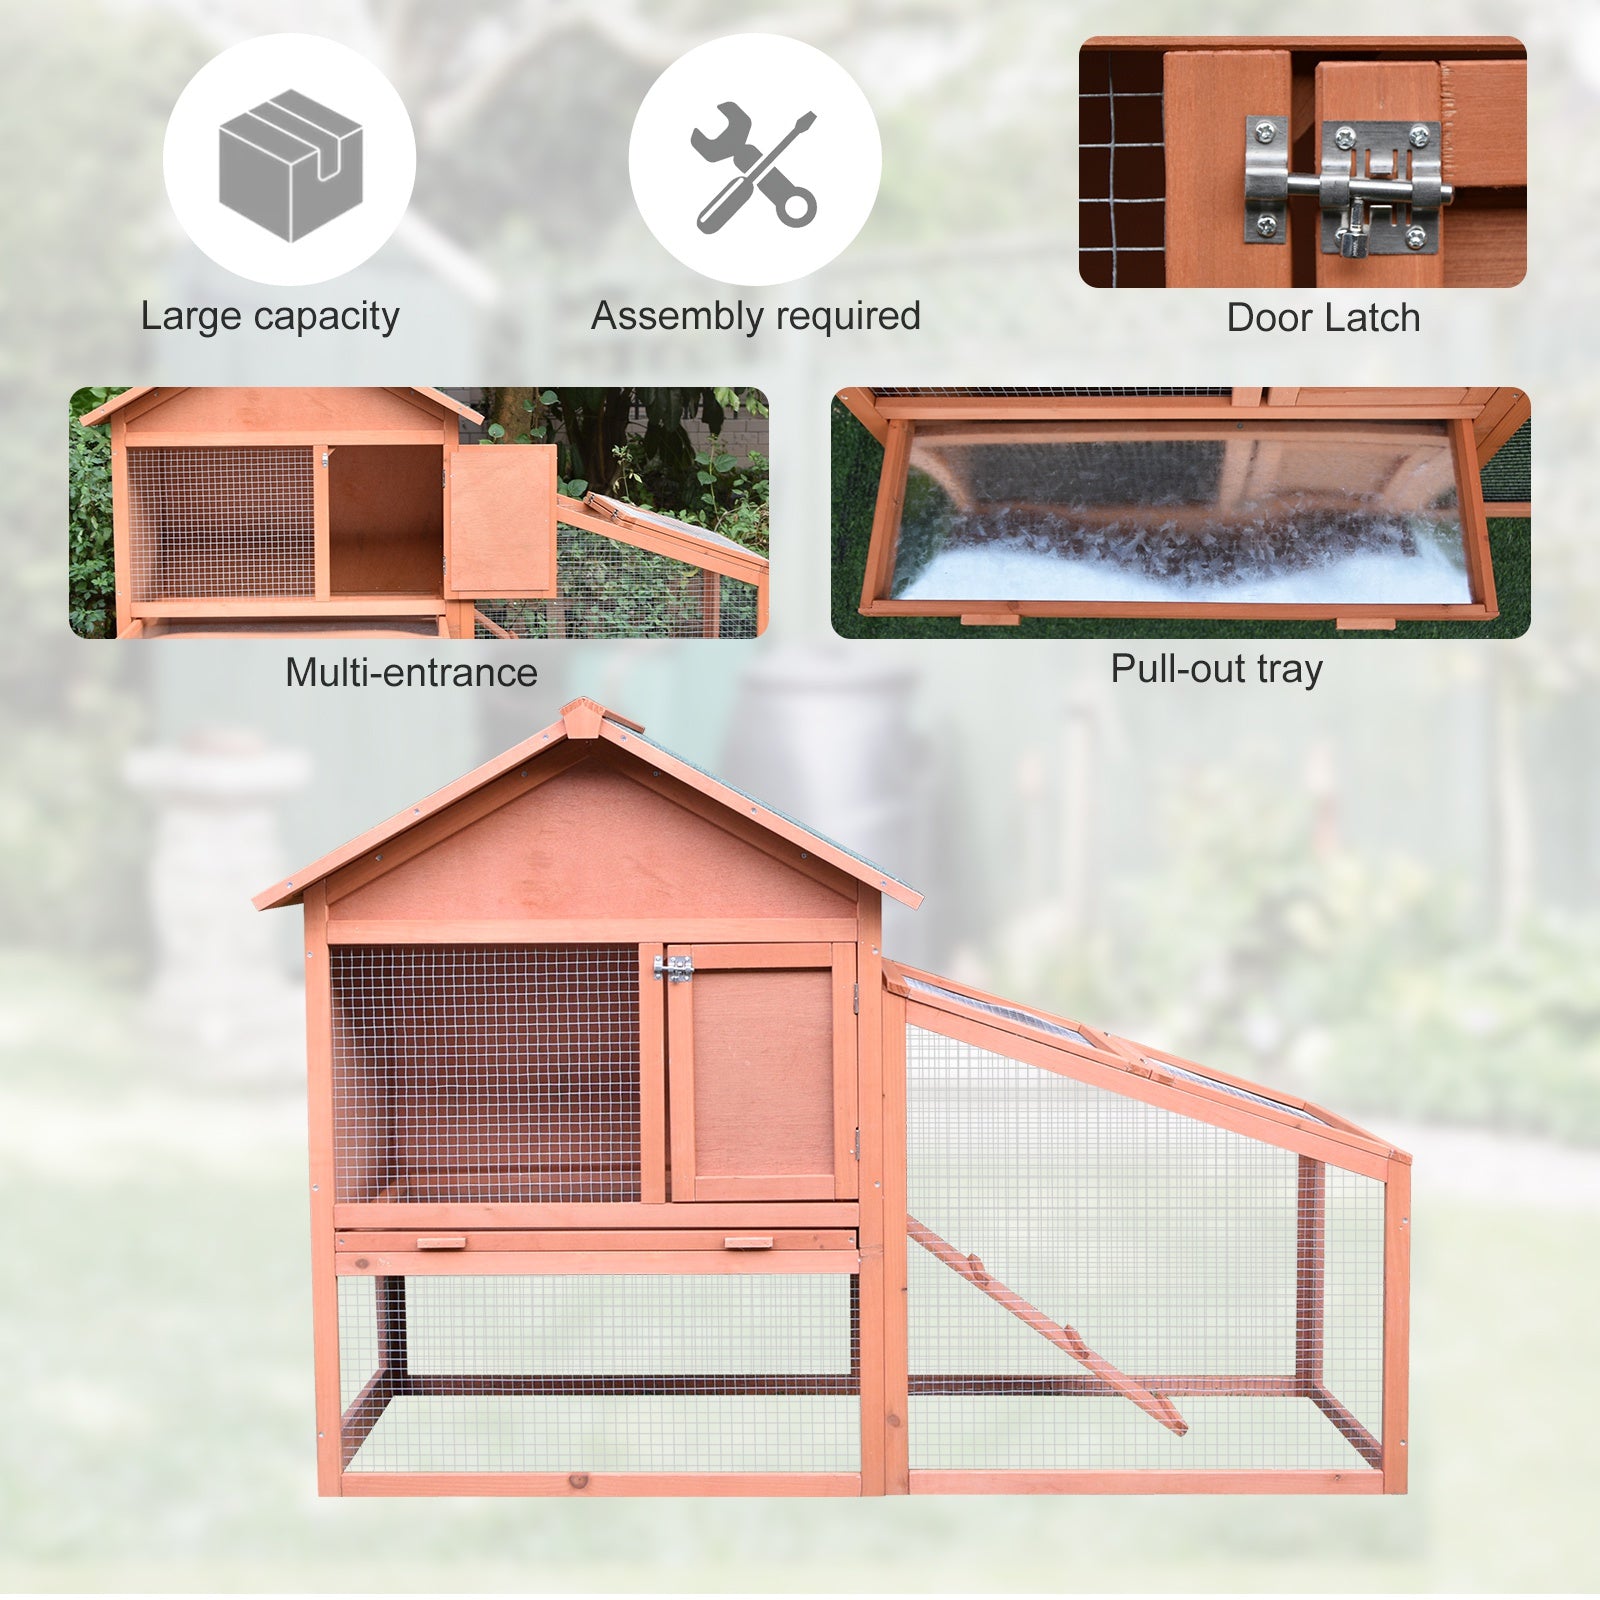 Small Animal Two-Level Fir Wood Hutch w/ Slide Out Tray Red/Brown